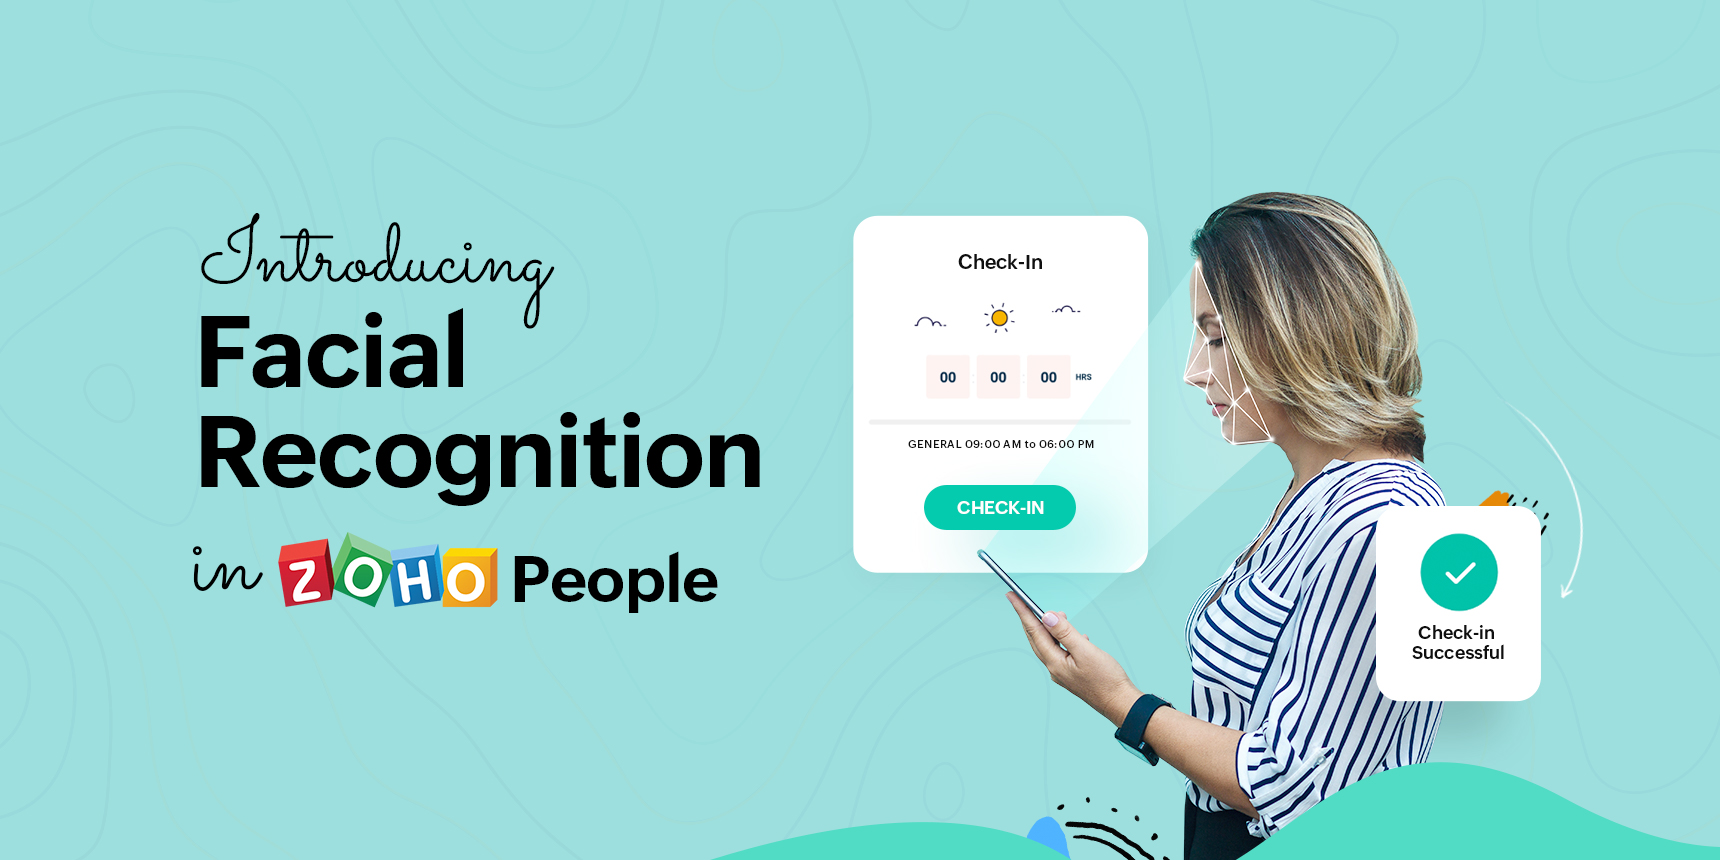 Facial recognition in Zoho People